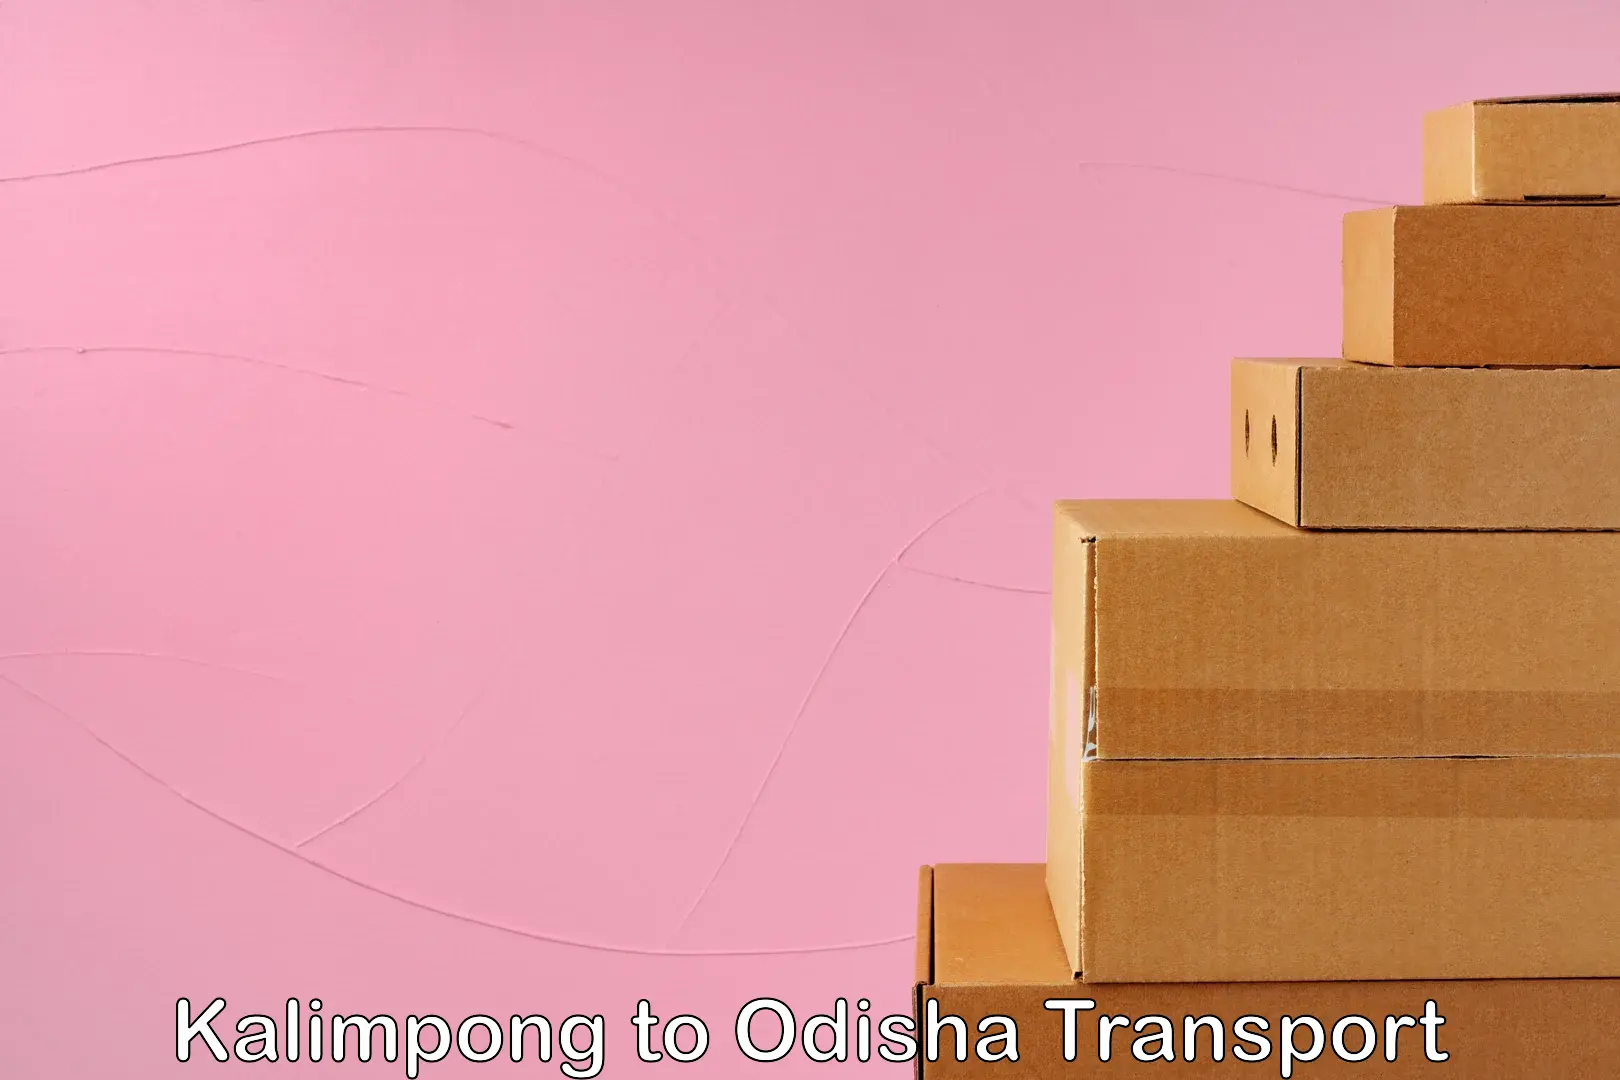 Container transport service in Kalimpong to Jharsuguda